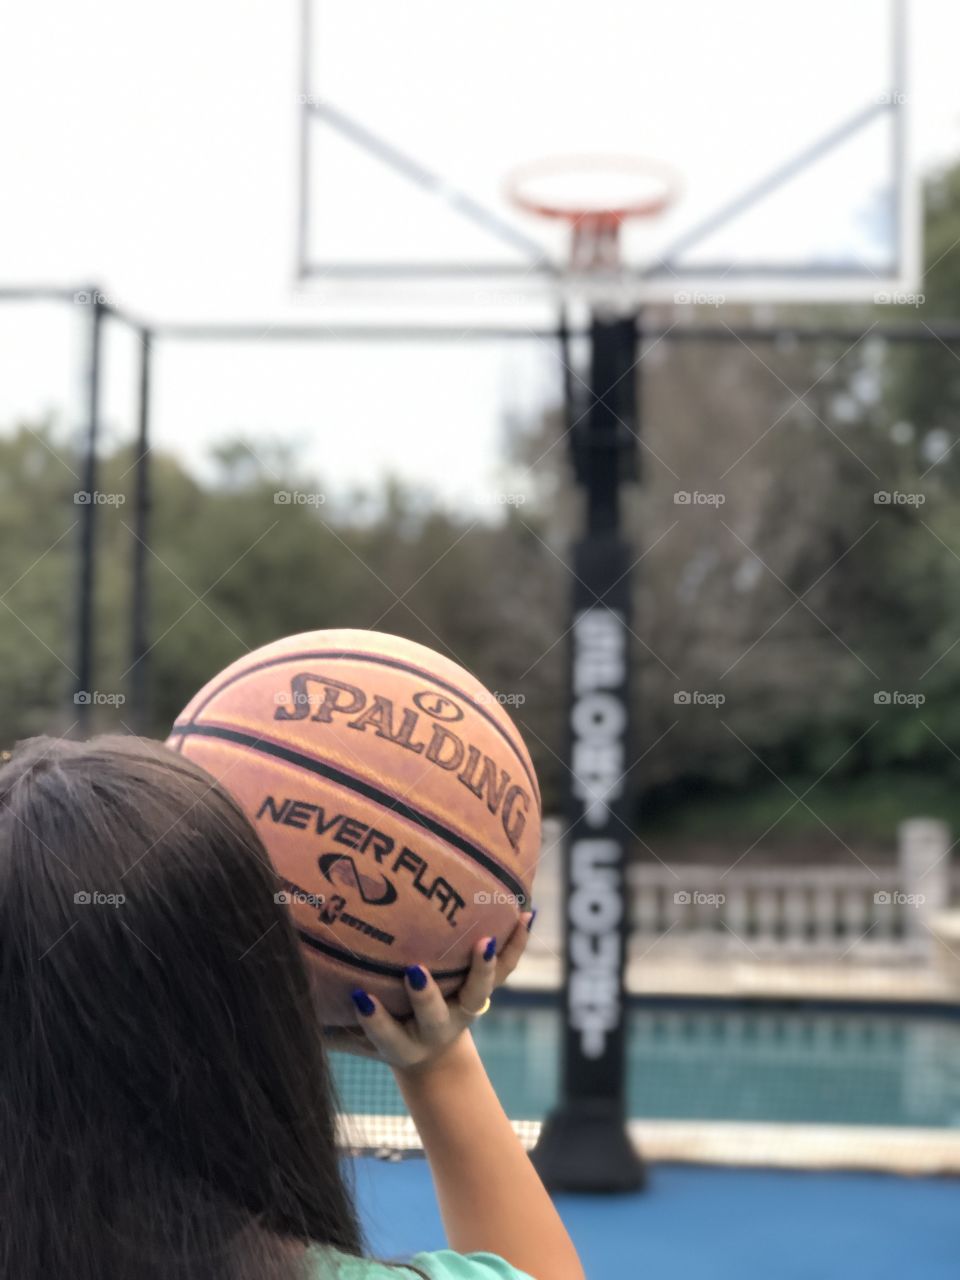 Let’s play some basketball